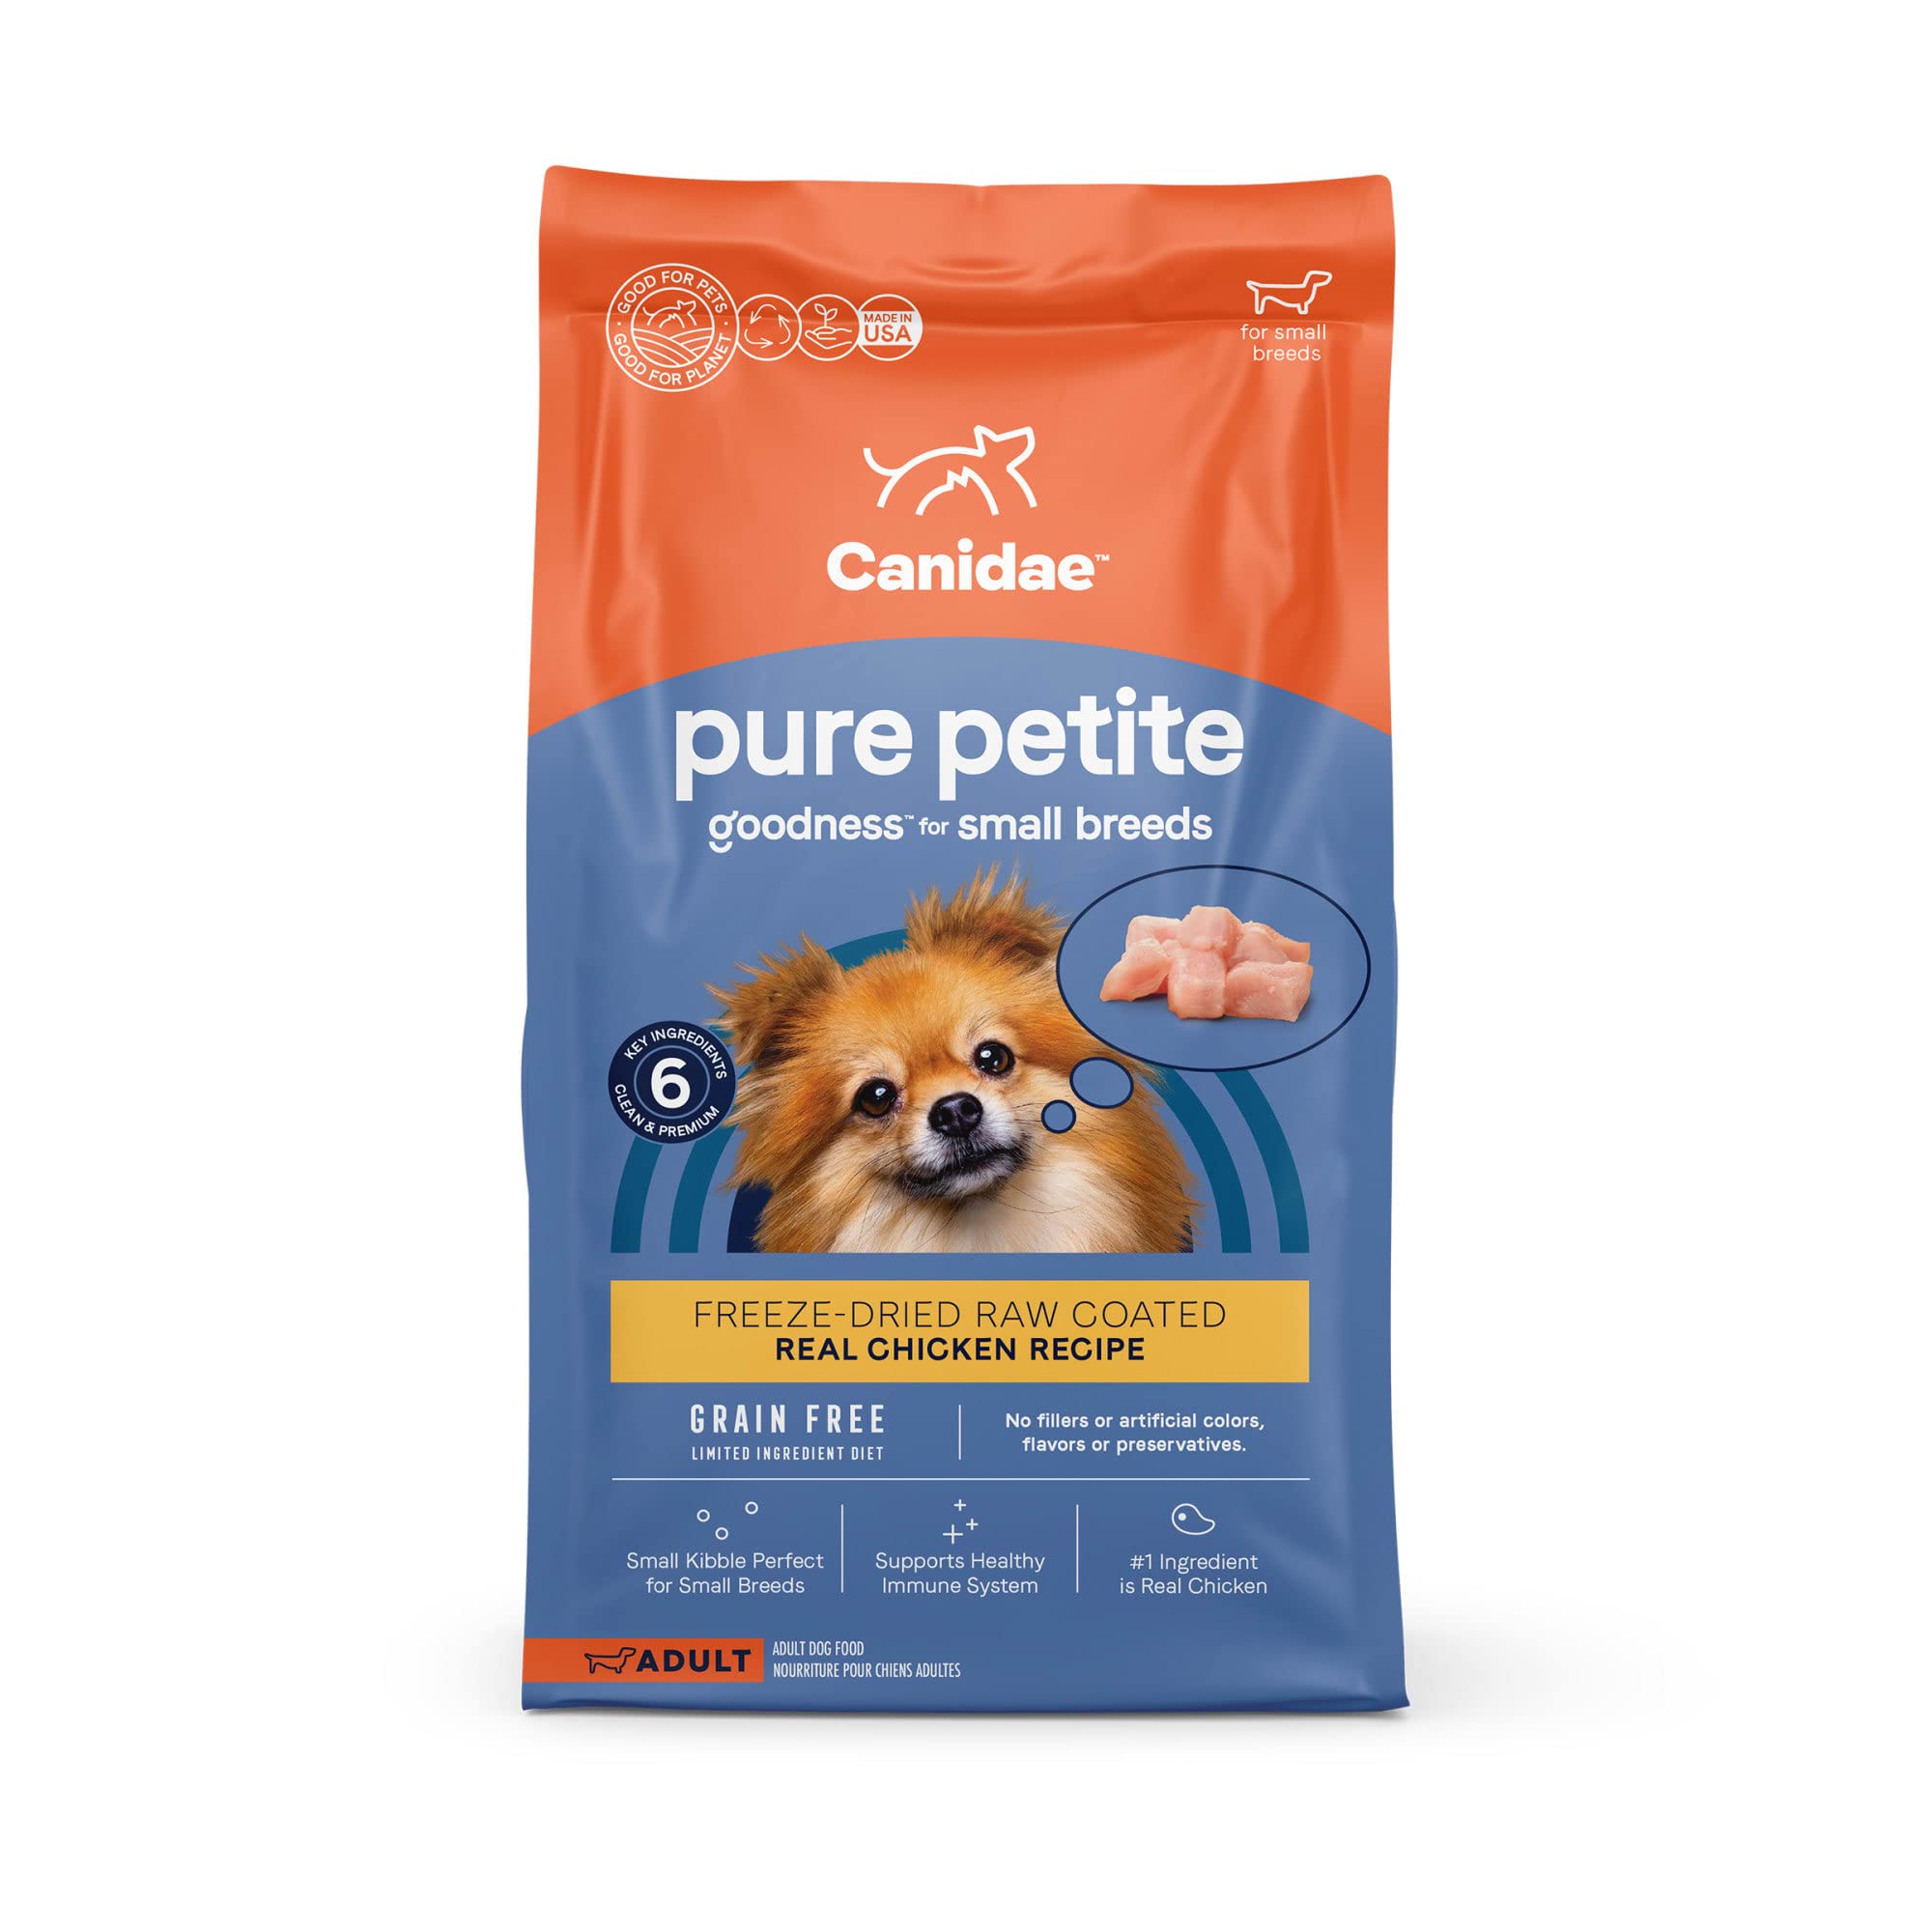 10-Lbs Canidae Pure Petite Premium Freeze-Dried Raw Coated Dog Food for Small Breeds (Real Chicken Recipe, Grain Free) $17.15 w/ S&S + Free Shipping w/ Prime or on $25+